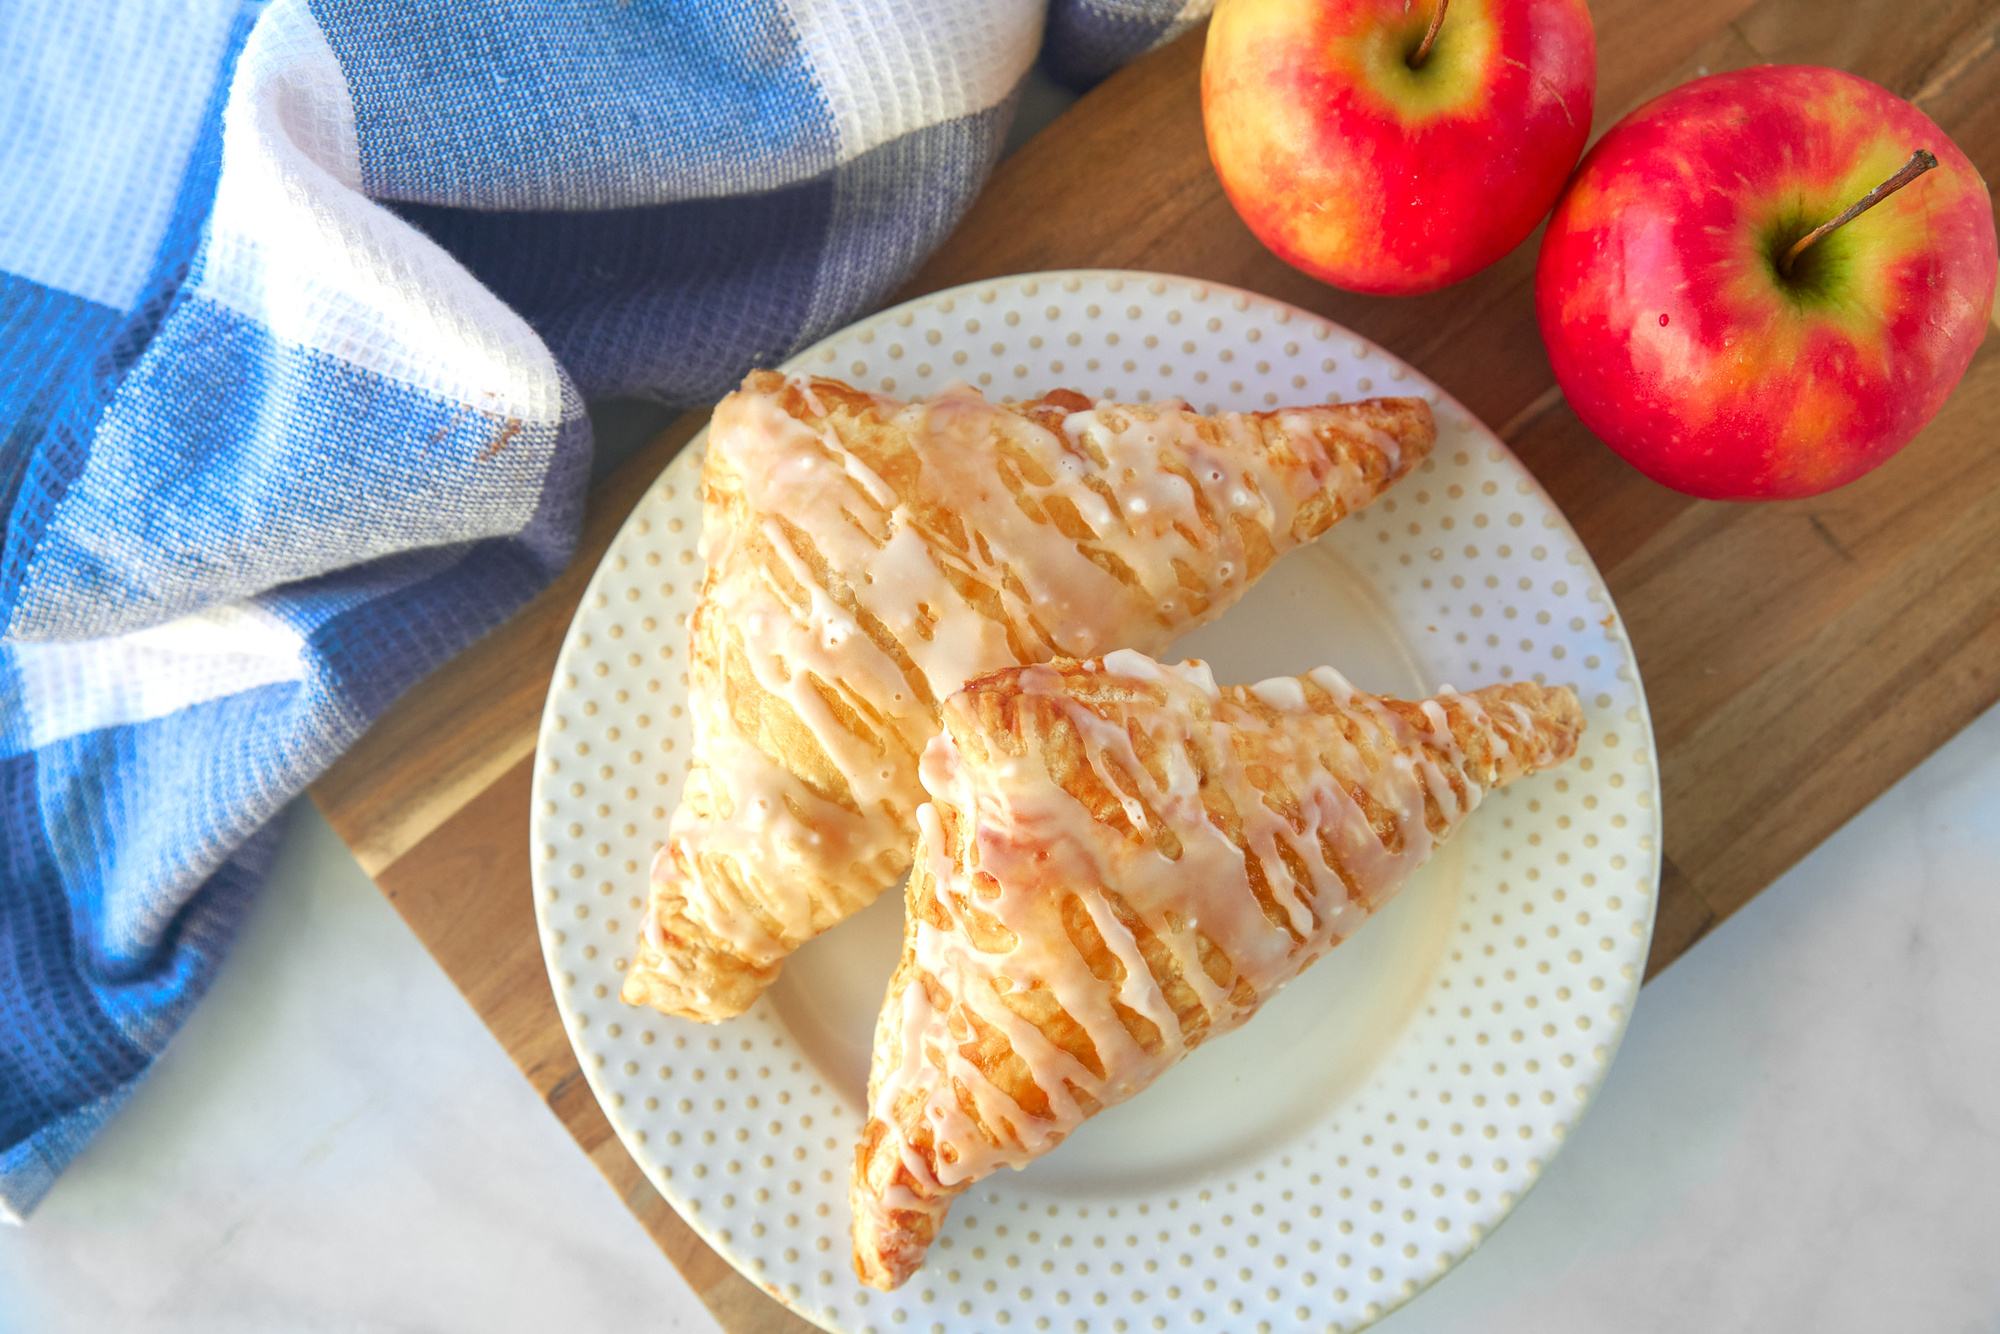 The Best and Simple Apple Turnover Recipe with Puff Pastry